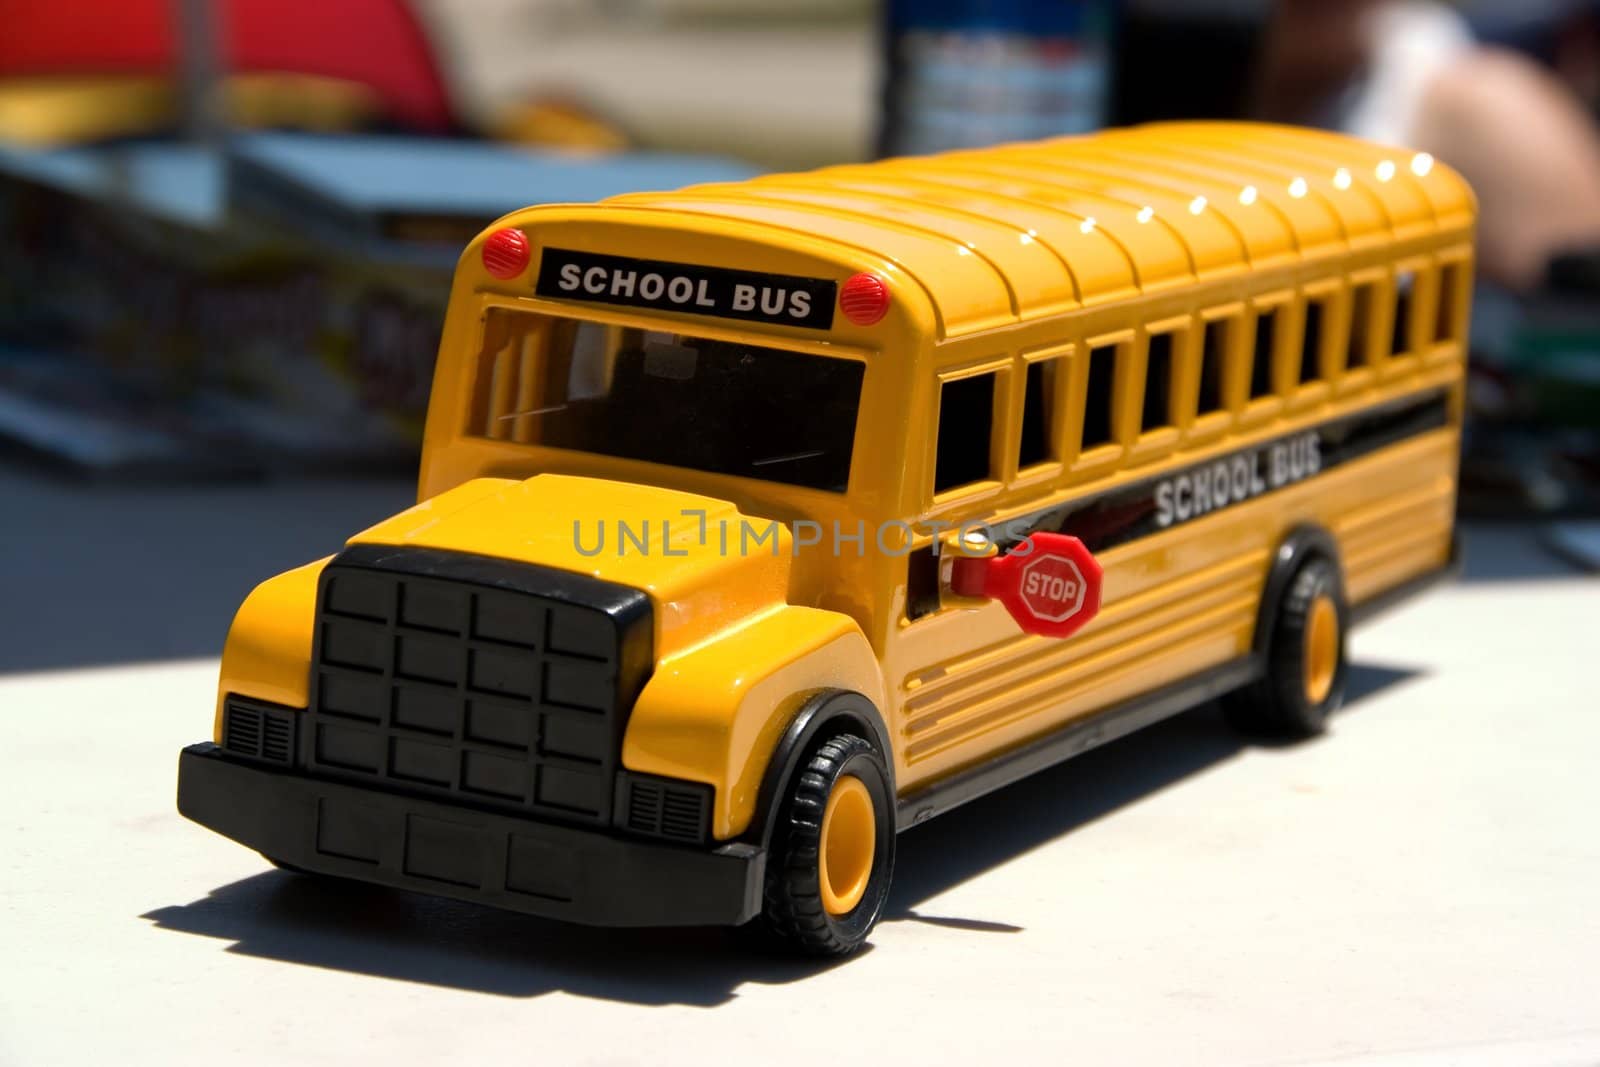 This is a picture of a toy school bus with the main focus on the front of the bus and stop sign.